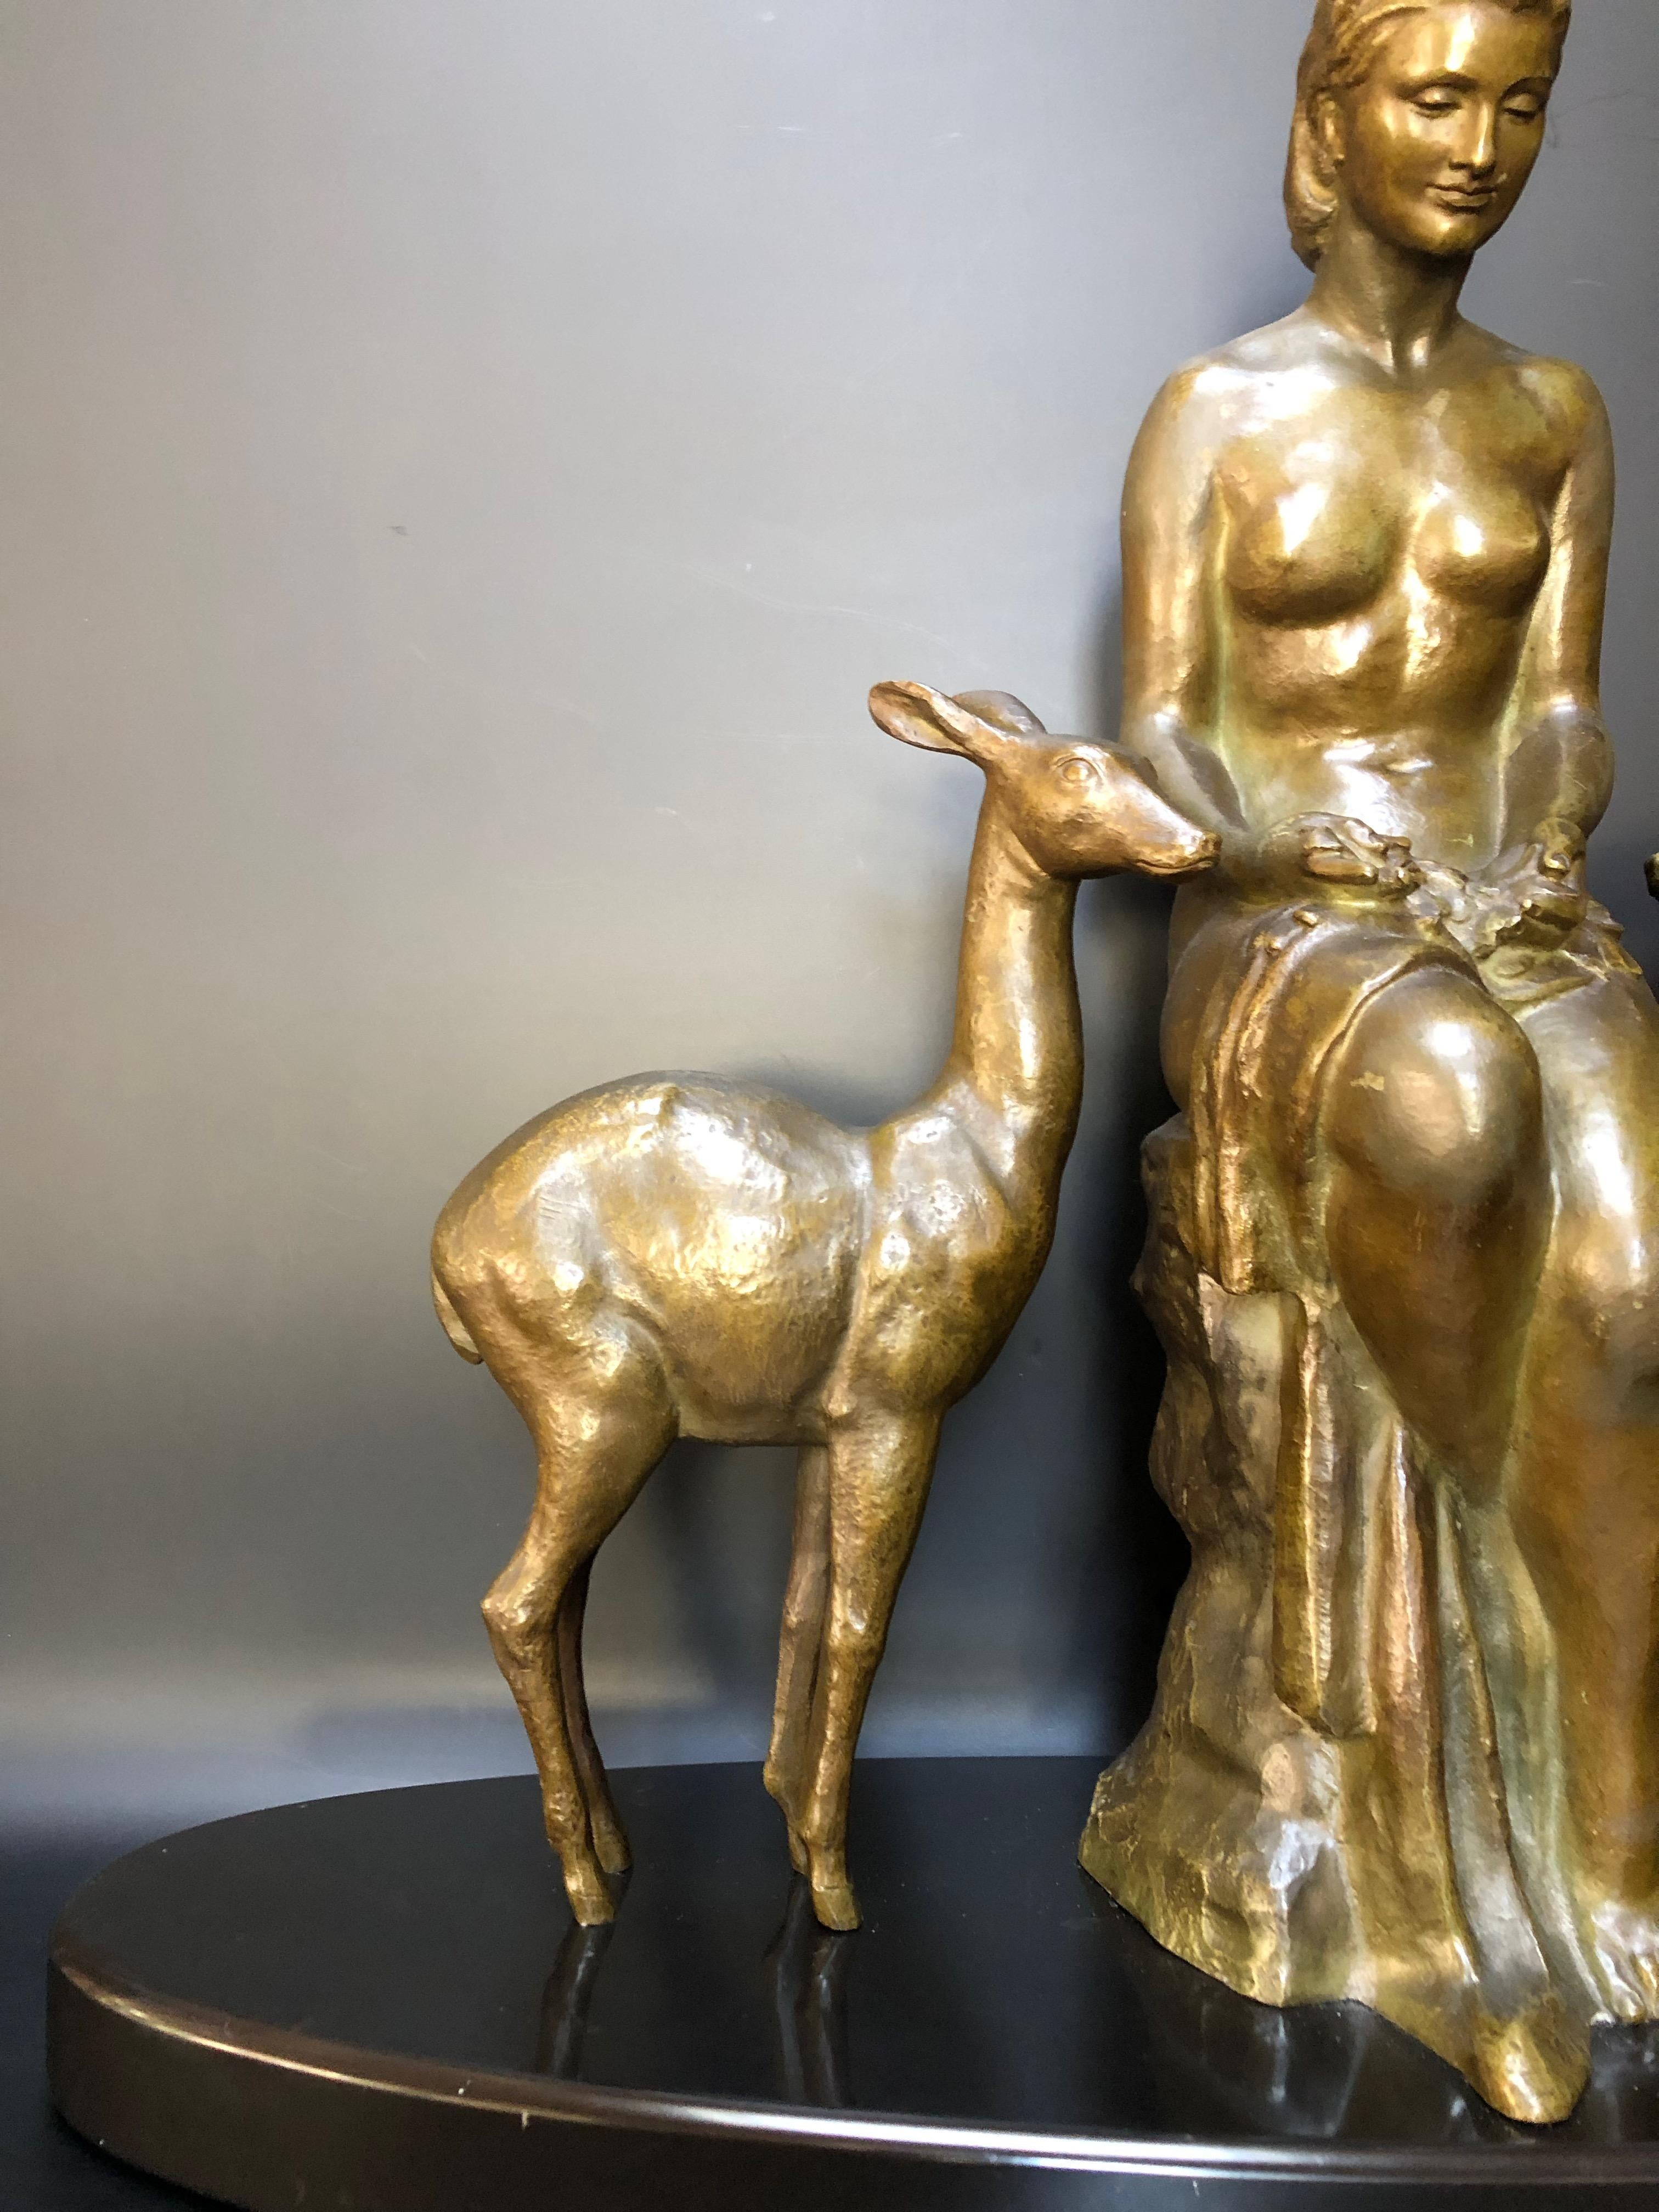 Bronze circa 1935 woman with fawns in bronze with green and brown patina on a black marble base (surfin from Belgium)

Son of a Florentine sculptor Ugo Cipriani, 1887 - 1960, studied at the Academy of Fine Arts in Florence and joined the Art Deco